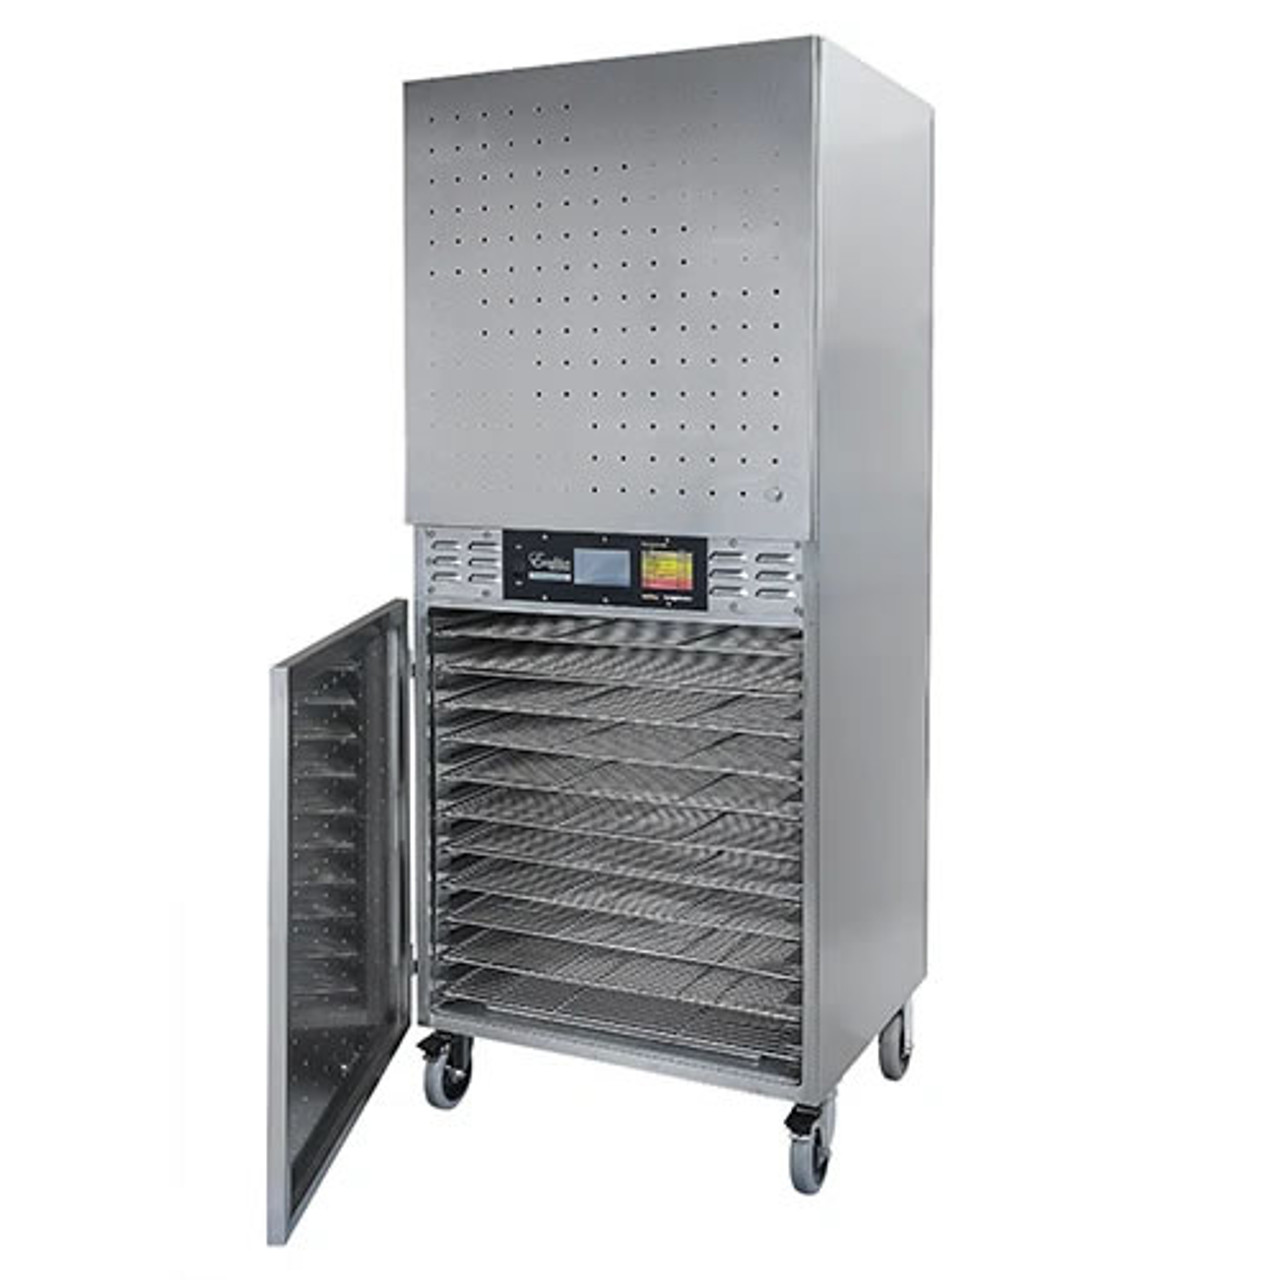 https://cdn11.bigcommerce.com/s-3n1nnt5qyw/images/stencil/1280x1280/products/9689/10854/excalibur-dual-zone-commercial-dehydrator-stainless-steel-nsf-model-comm2-1__21451.1629750702.jpg?c=1?imbypass=on